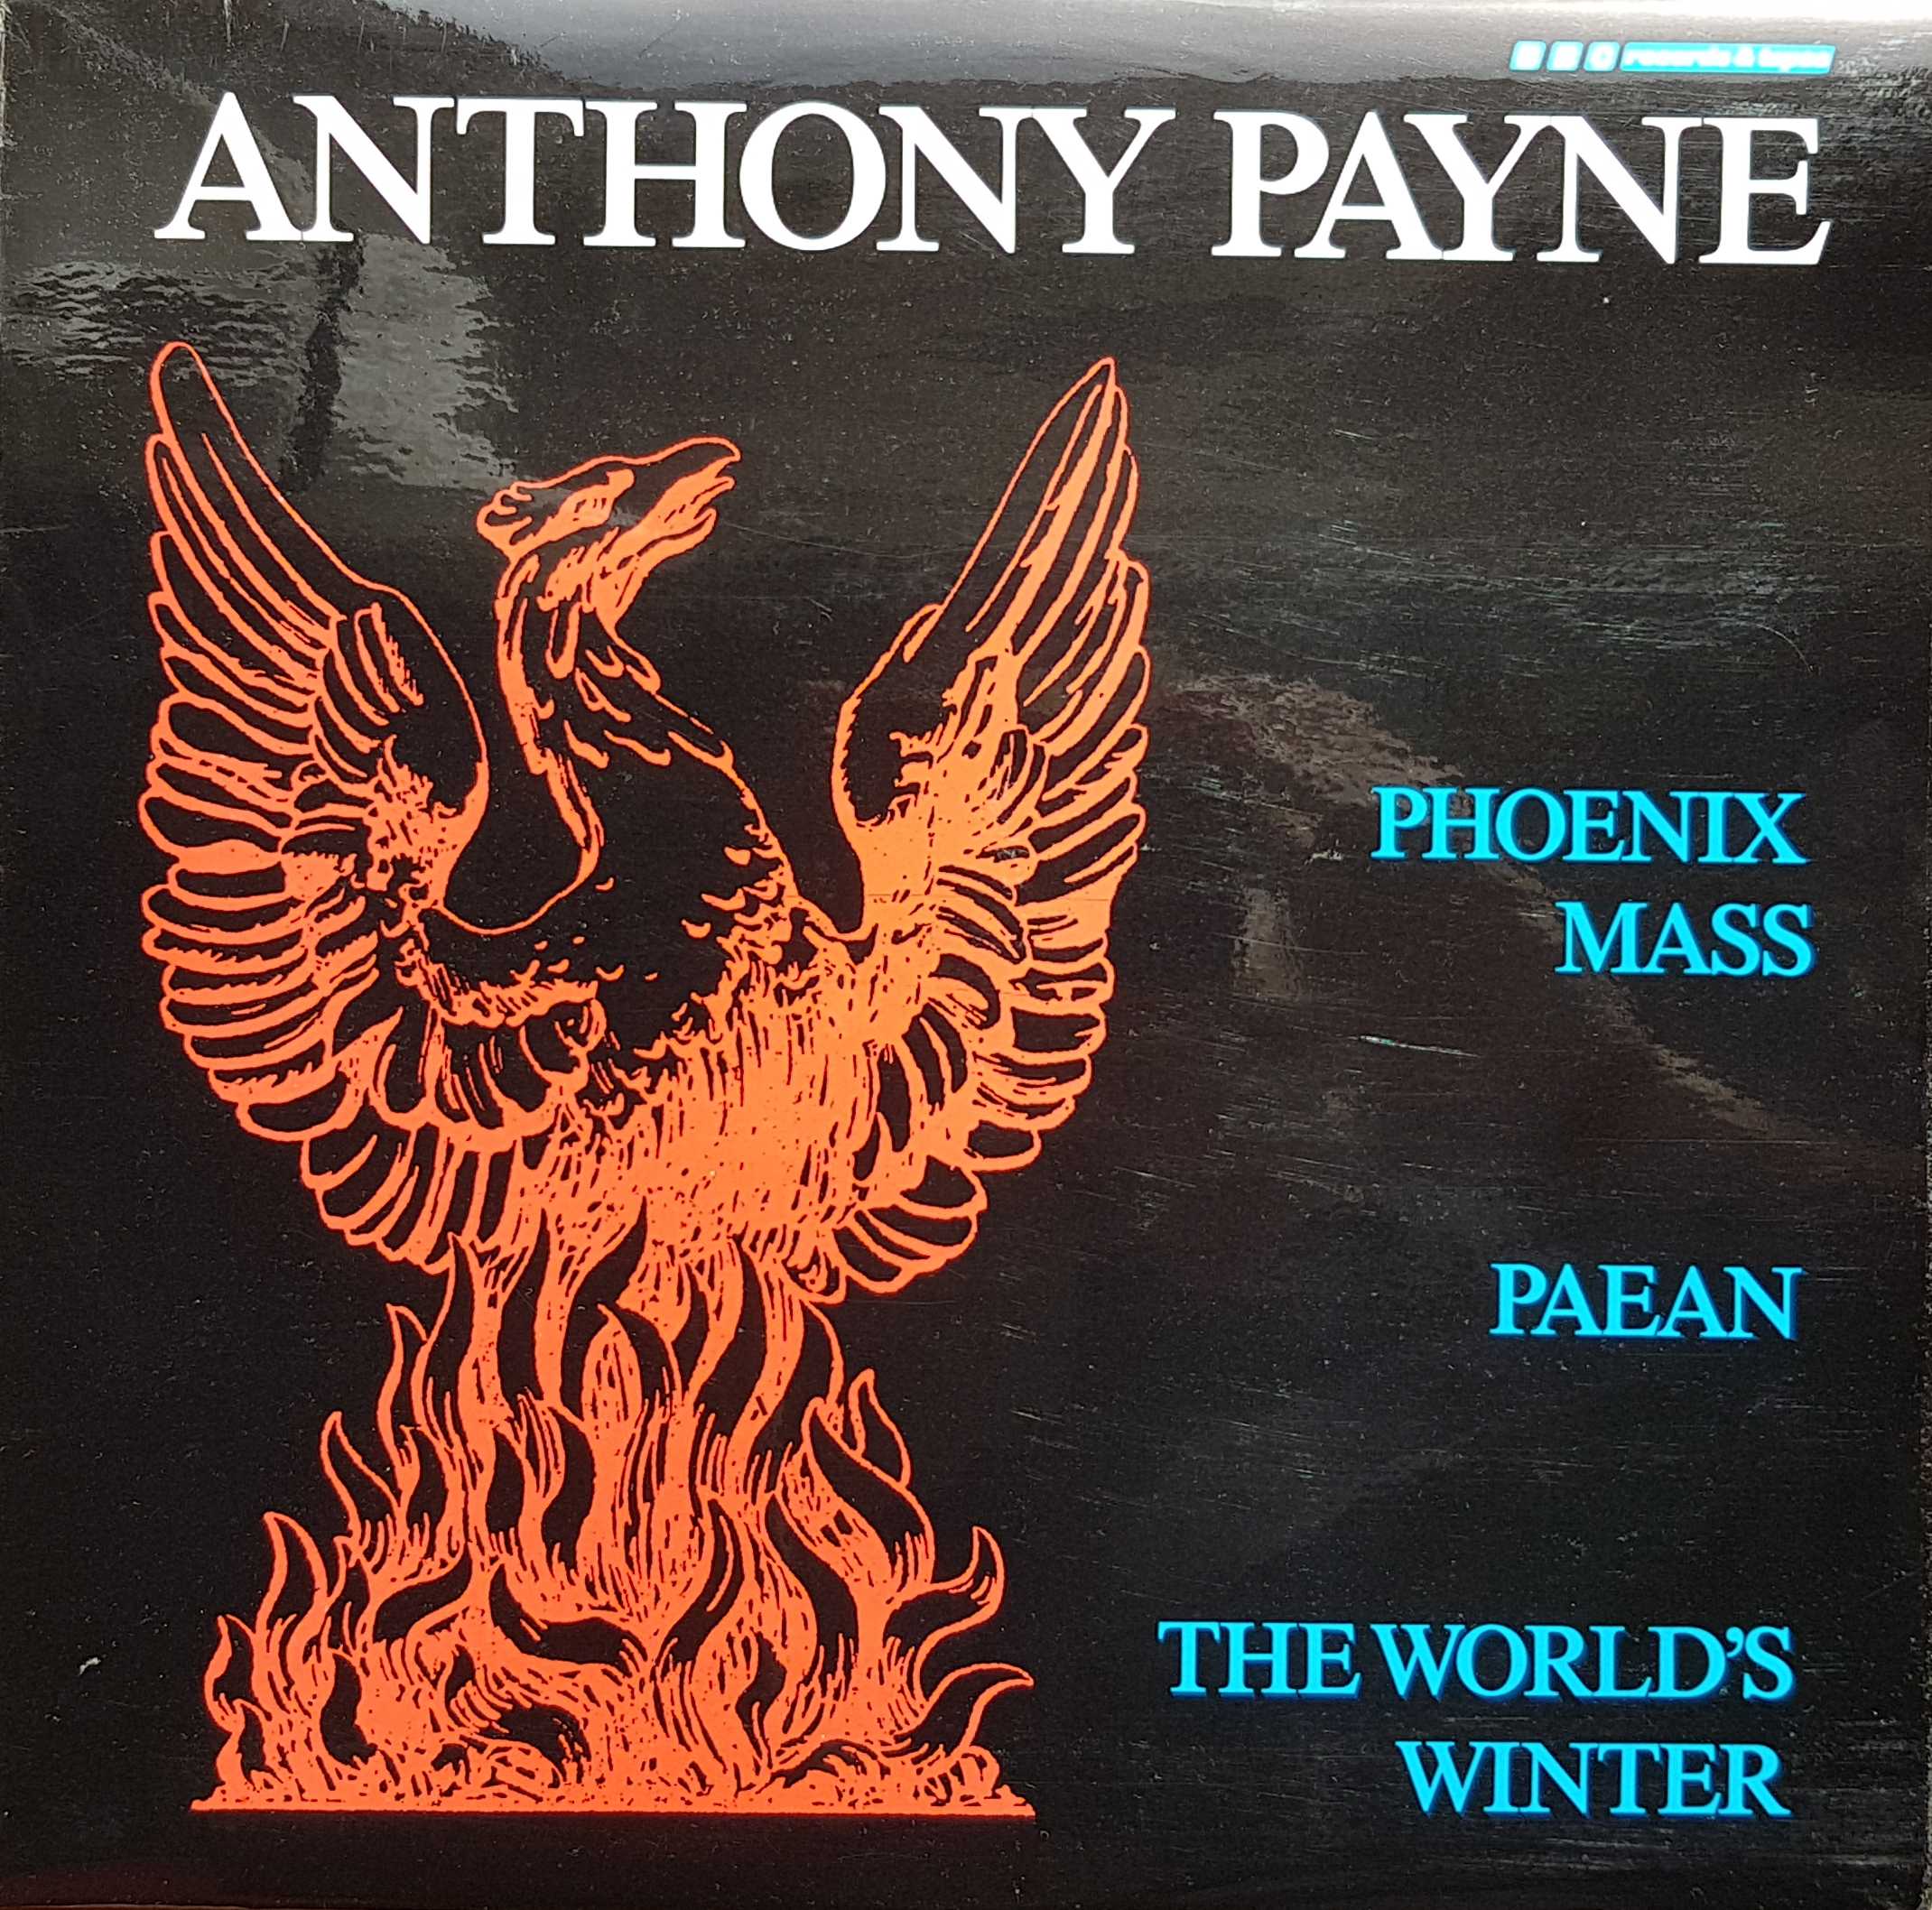 Picture of REH 297 The music of Anthony Payne by artist Anthony Payne from the BBC albums - Records and Tapes library